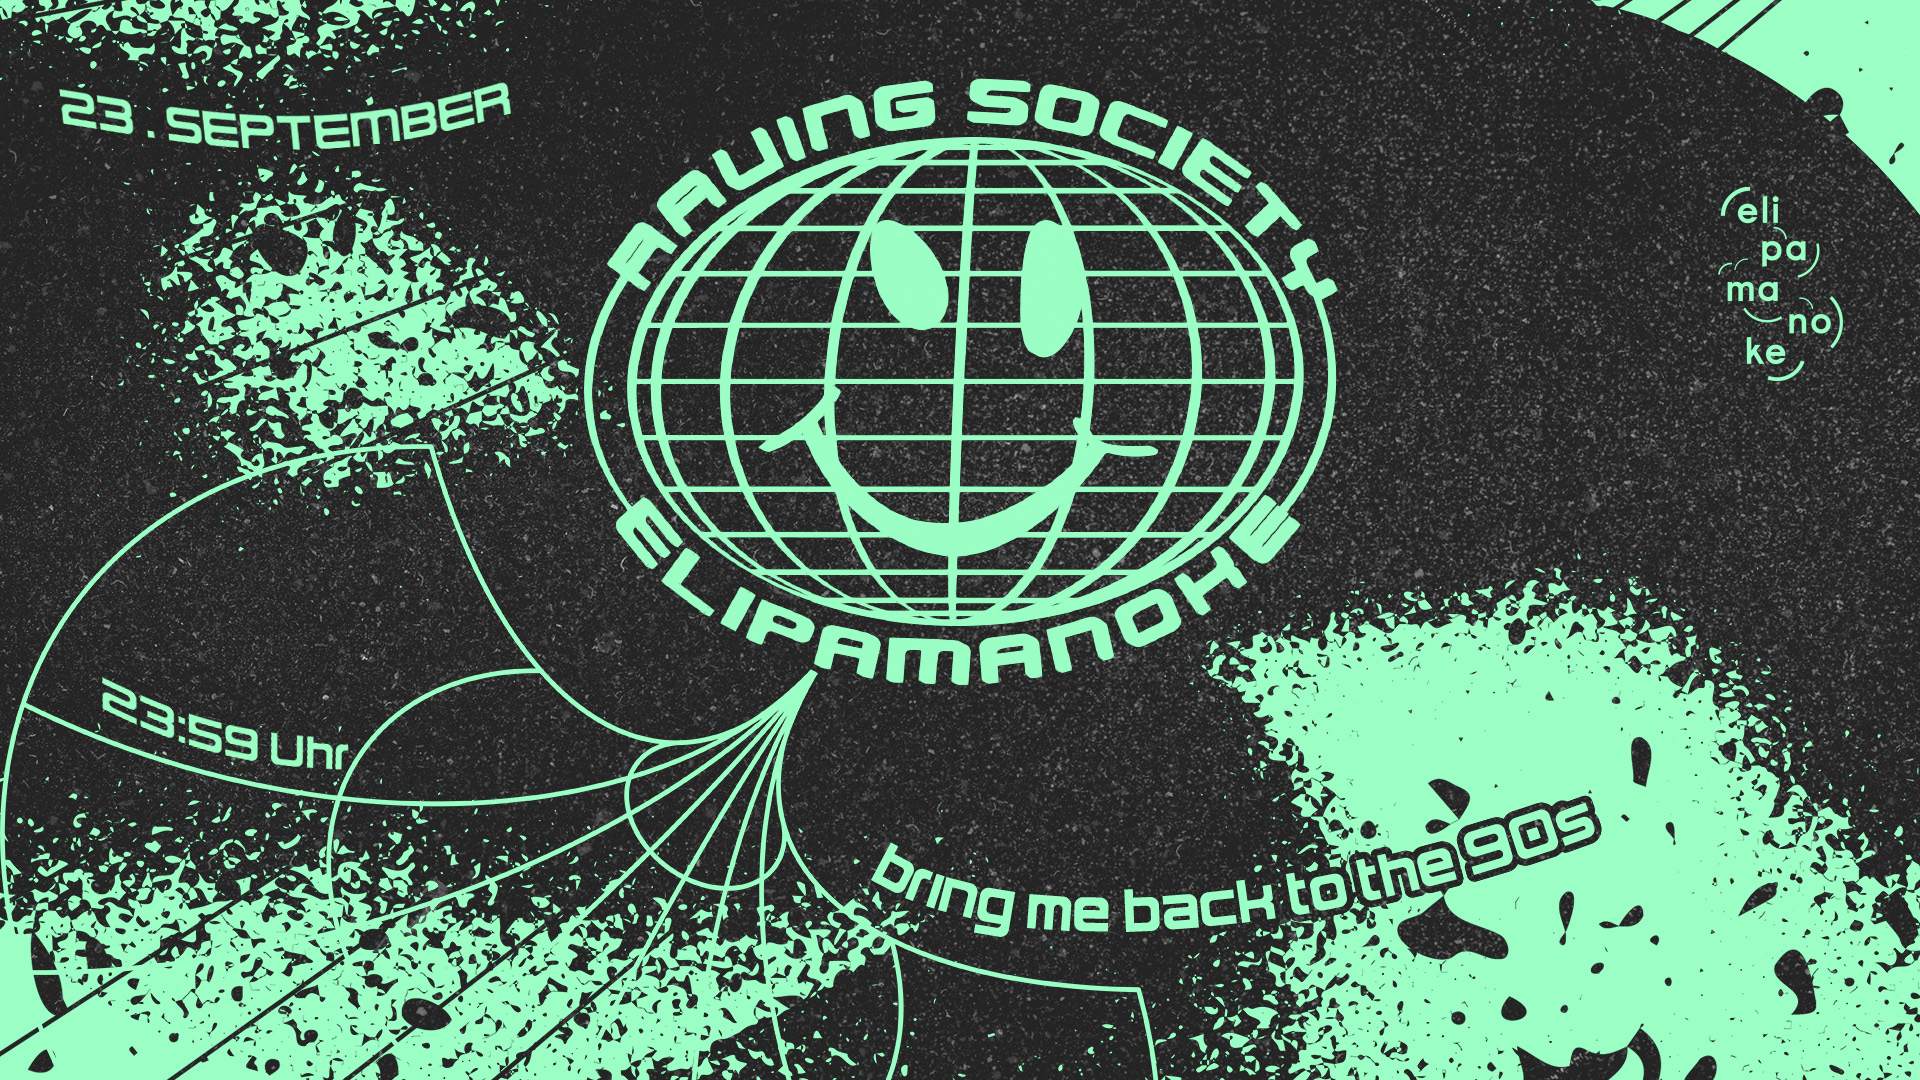 raving society - back to the 90s oldschool rave - Flyer front